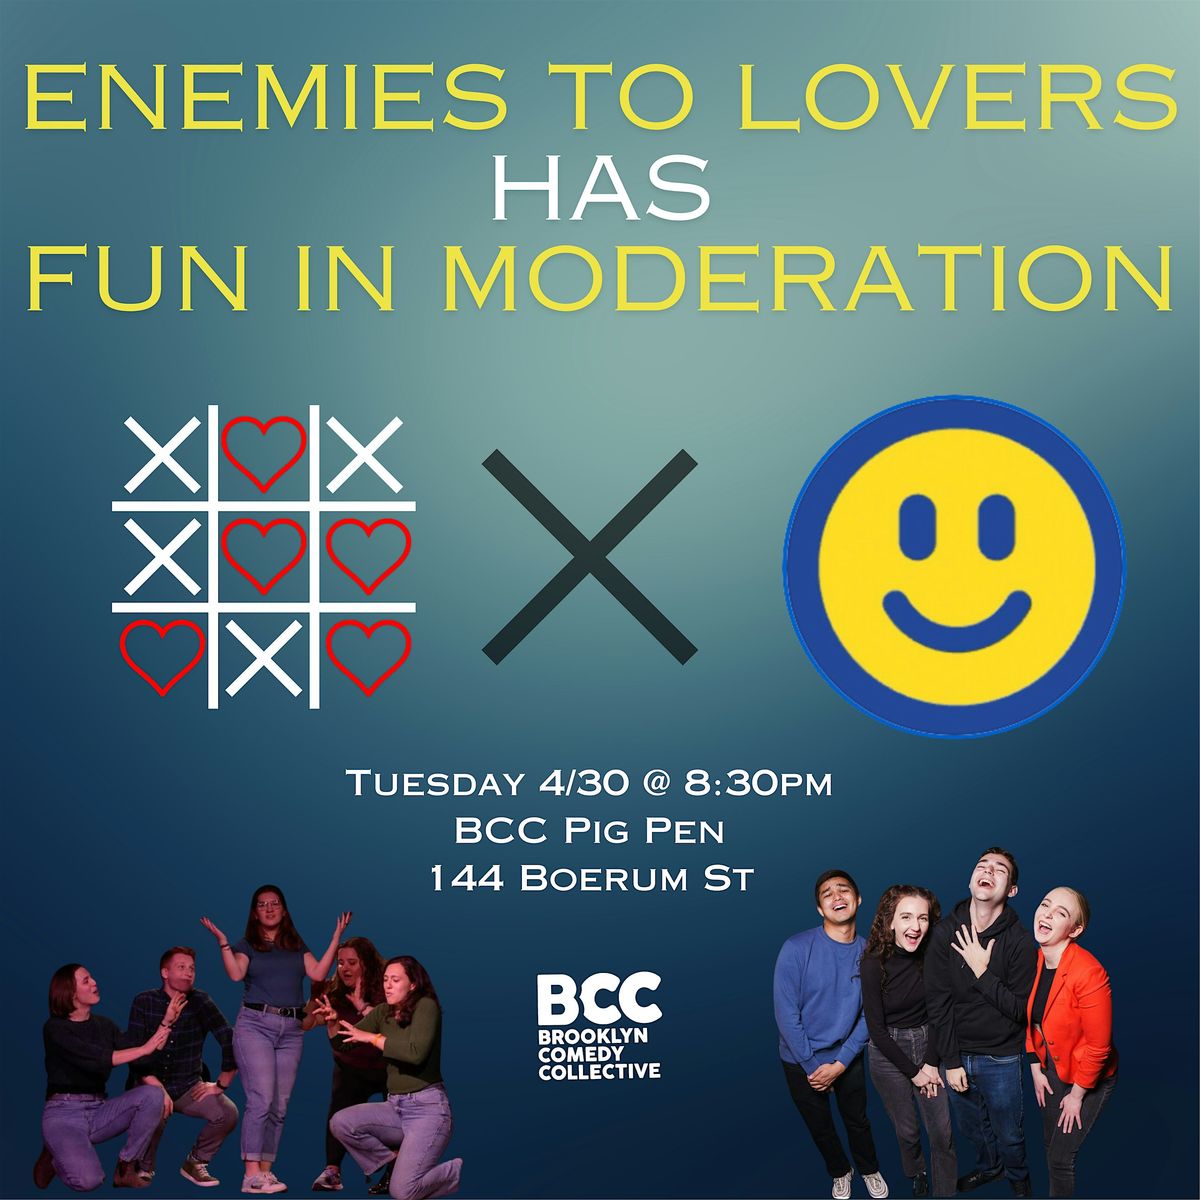 Enemies to Lovers has Fun in Moderation